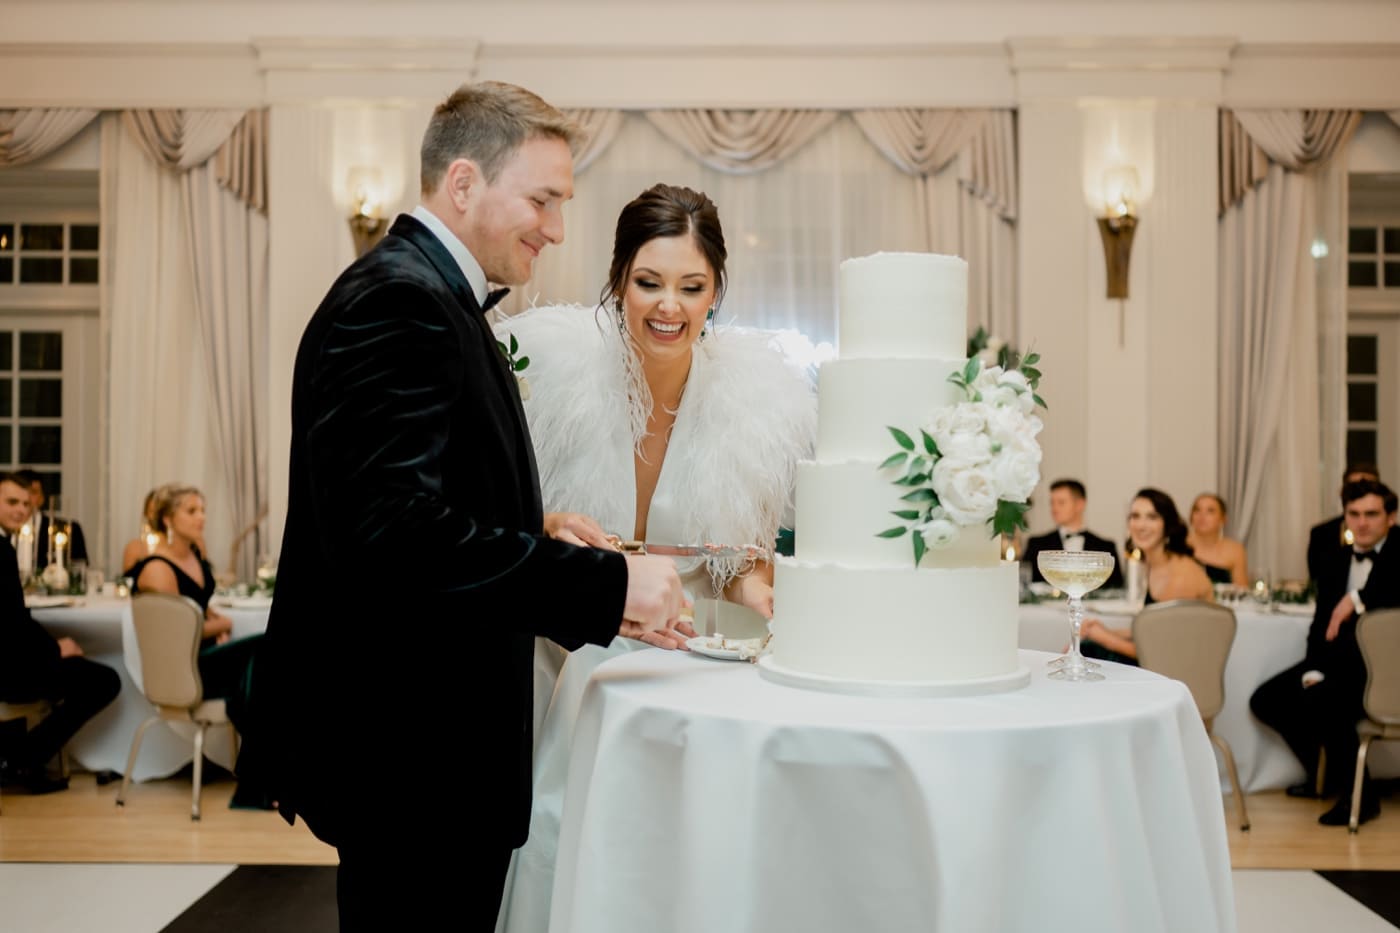 64 cake cutting hotel fort des moines wedding